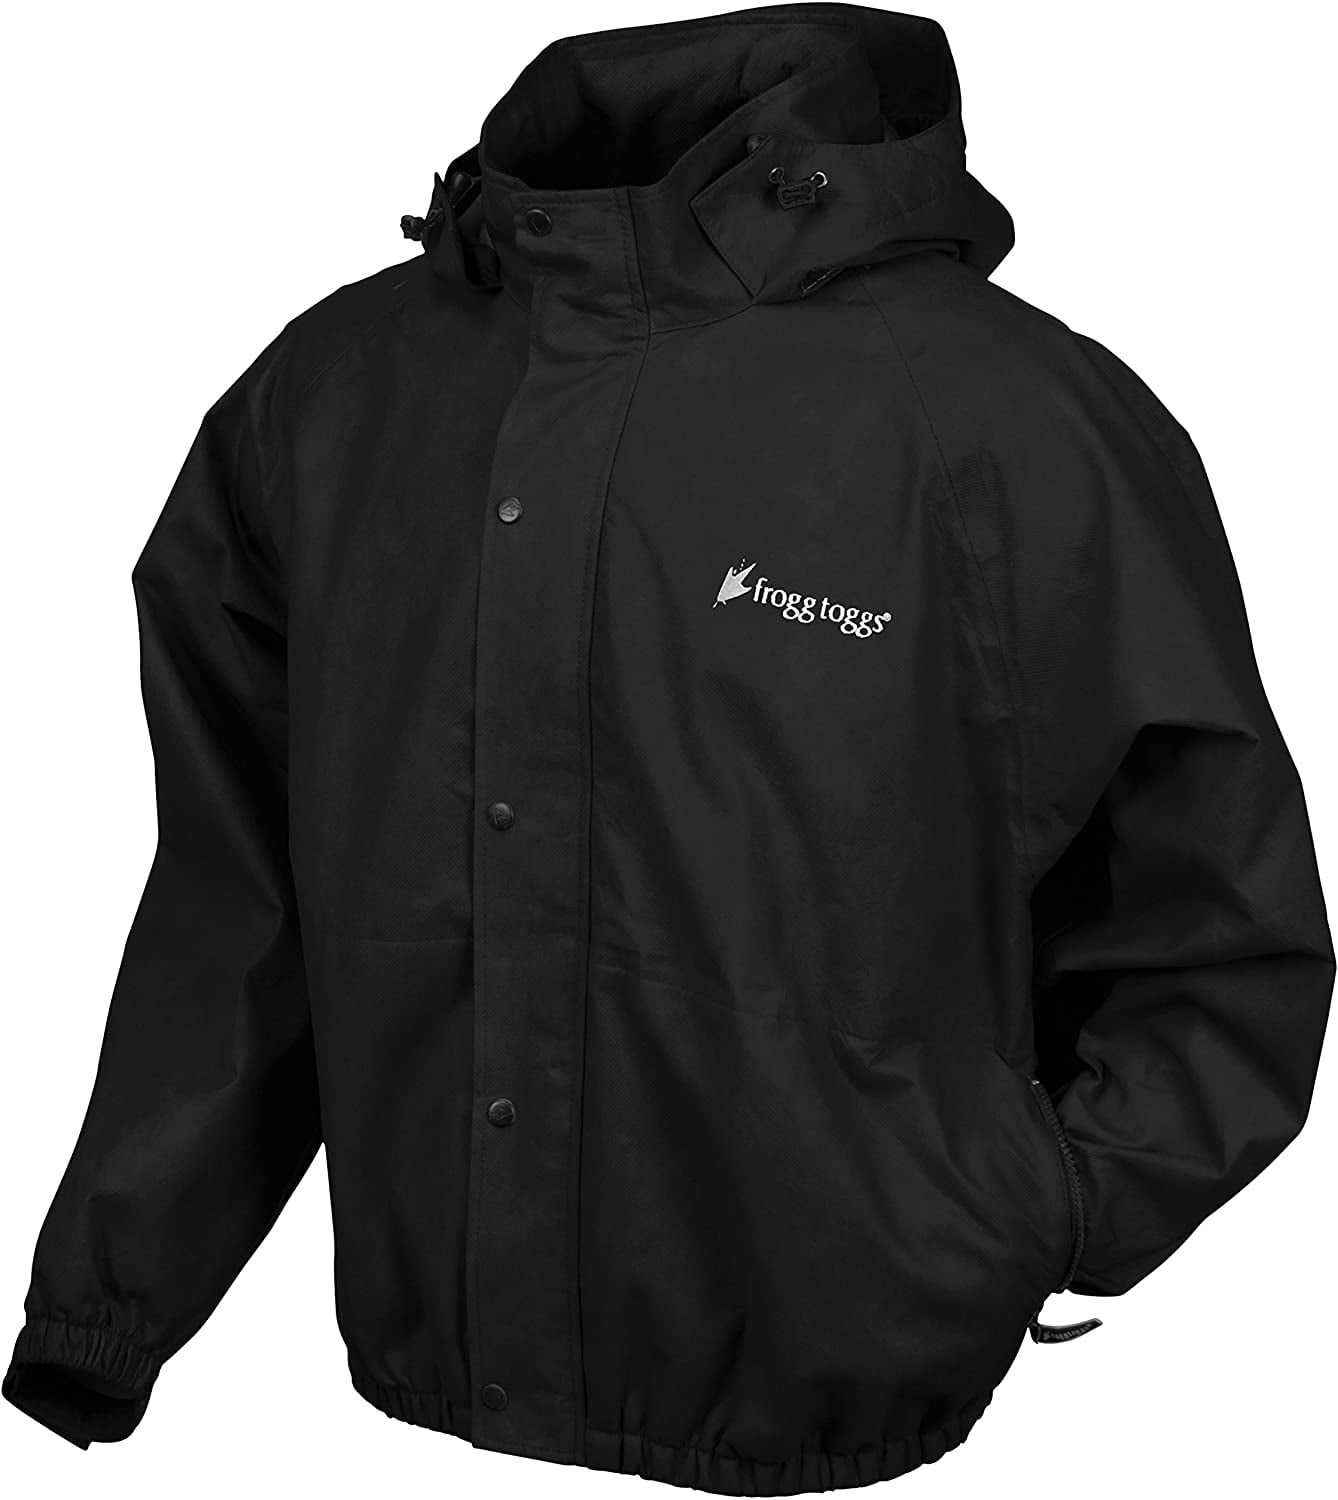 FROGG TOGGS Mens Classic Pro Action Waterproof Breathable Rain Jacket 